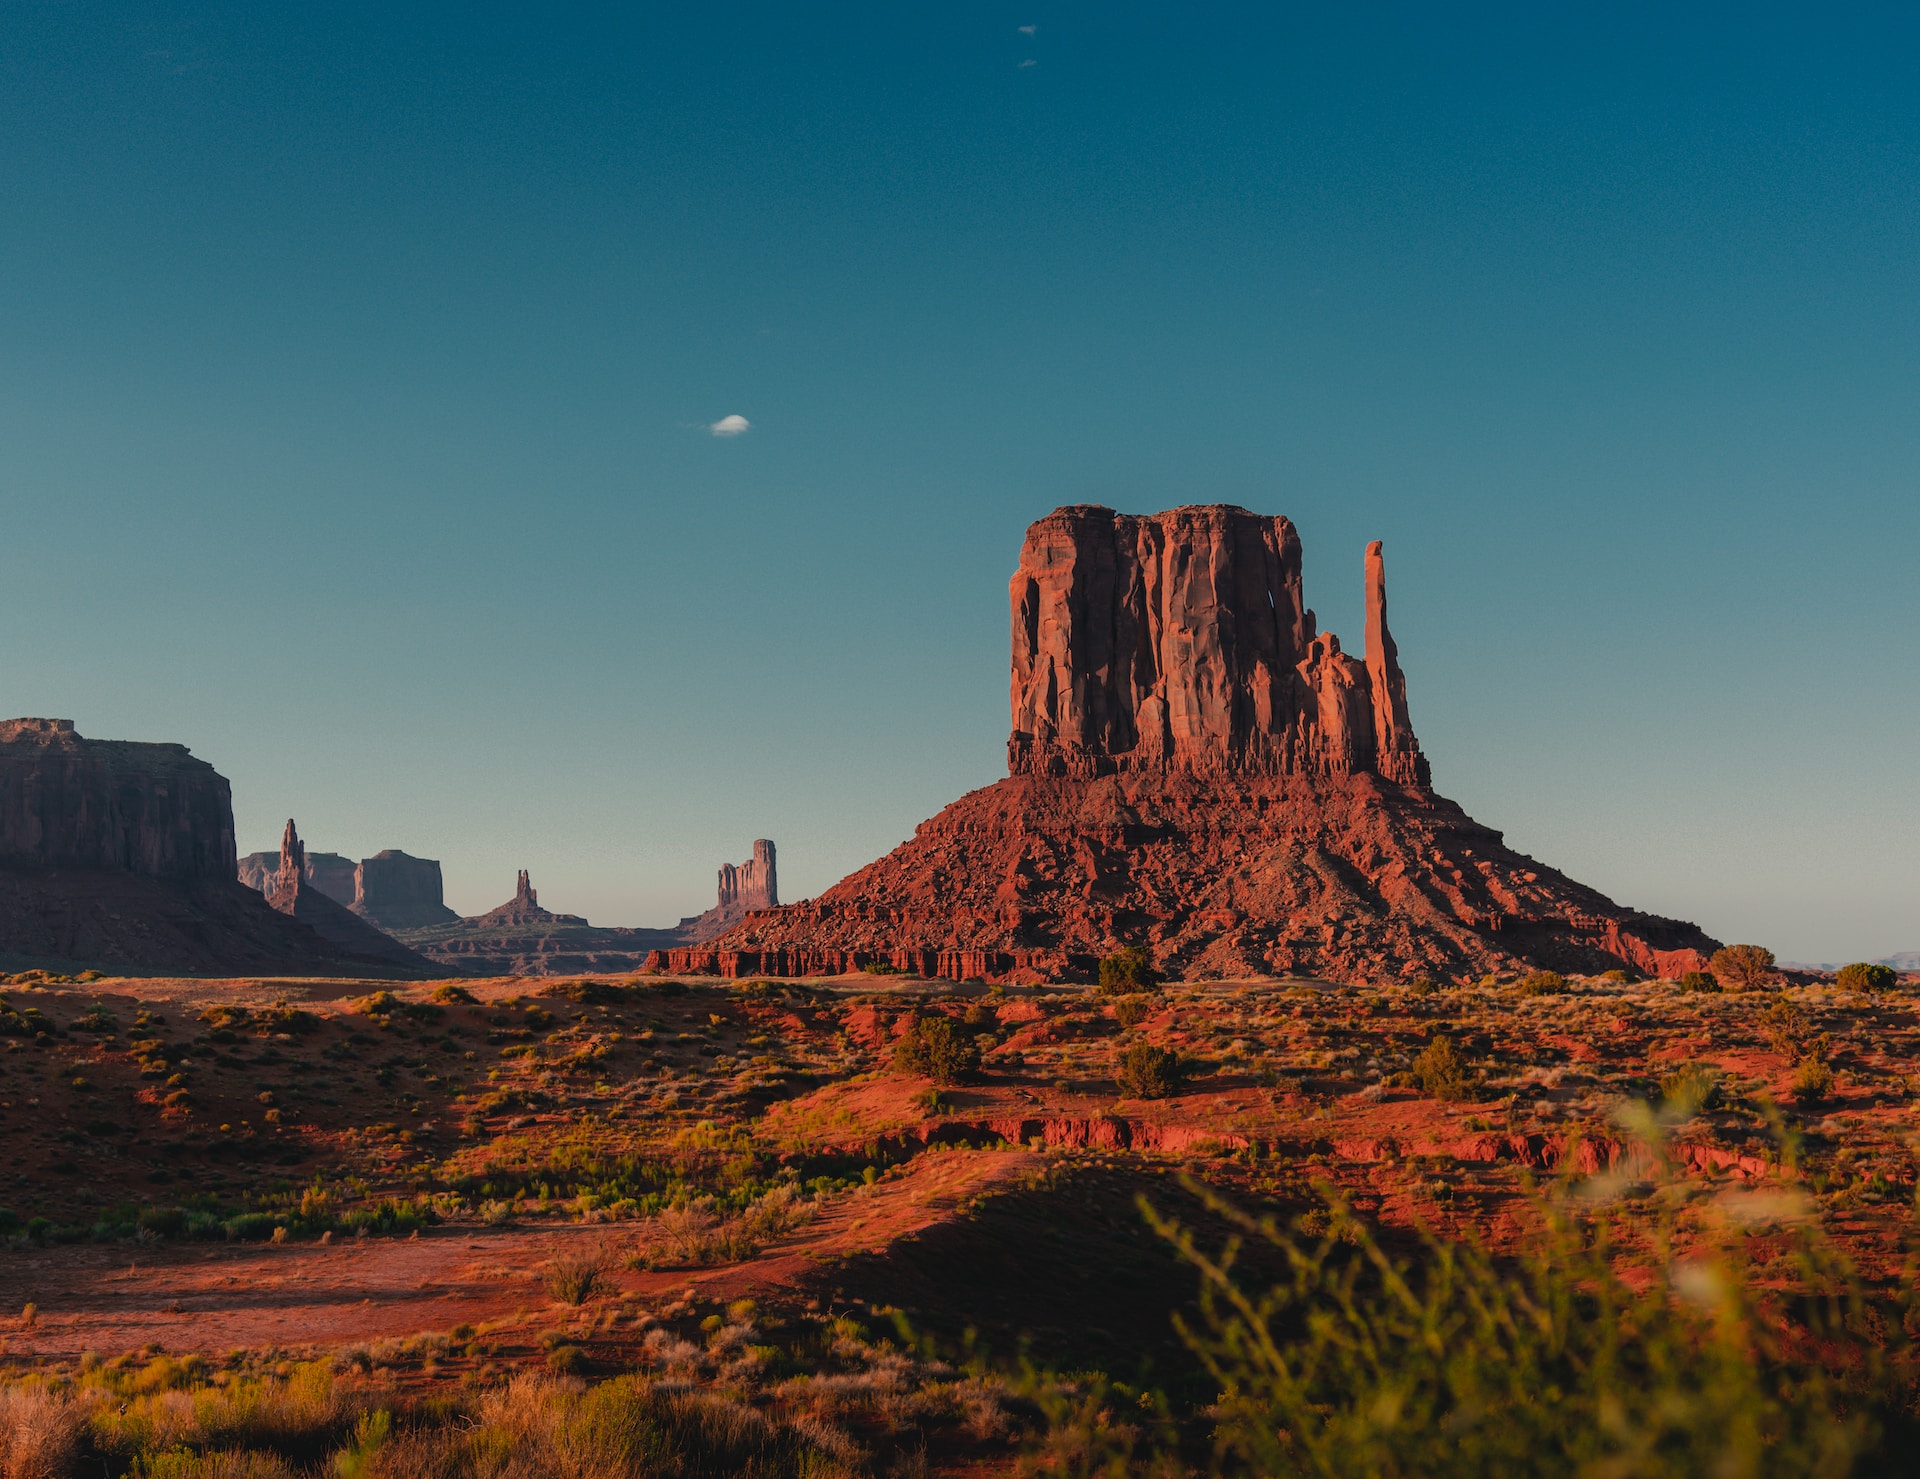 The iconic Monument Valley.